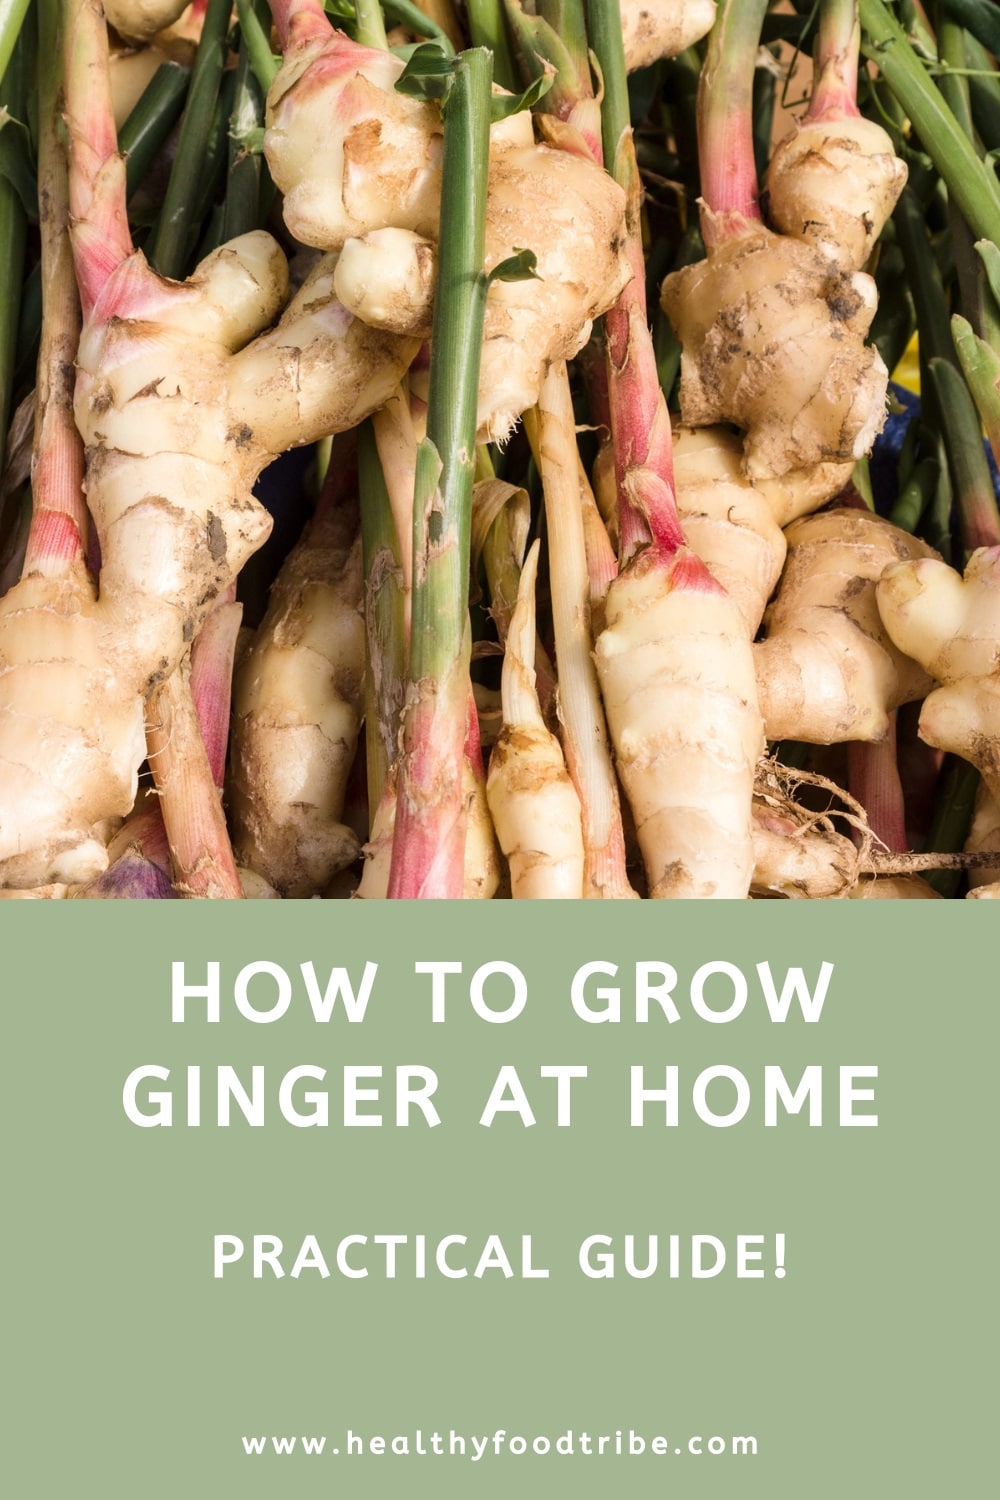 How to grow ginger at home (practical guide)